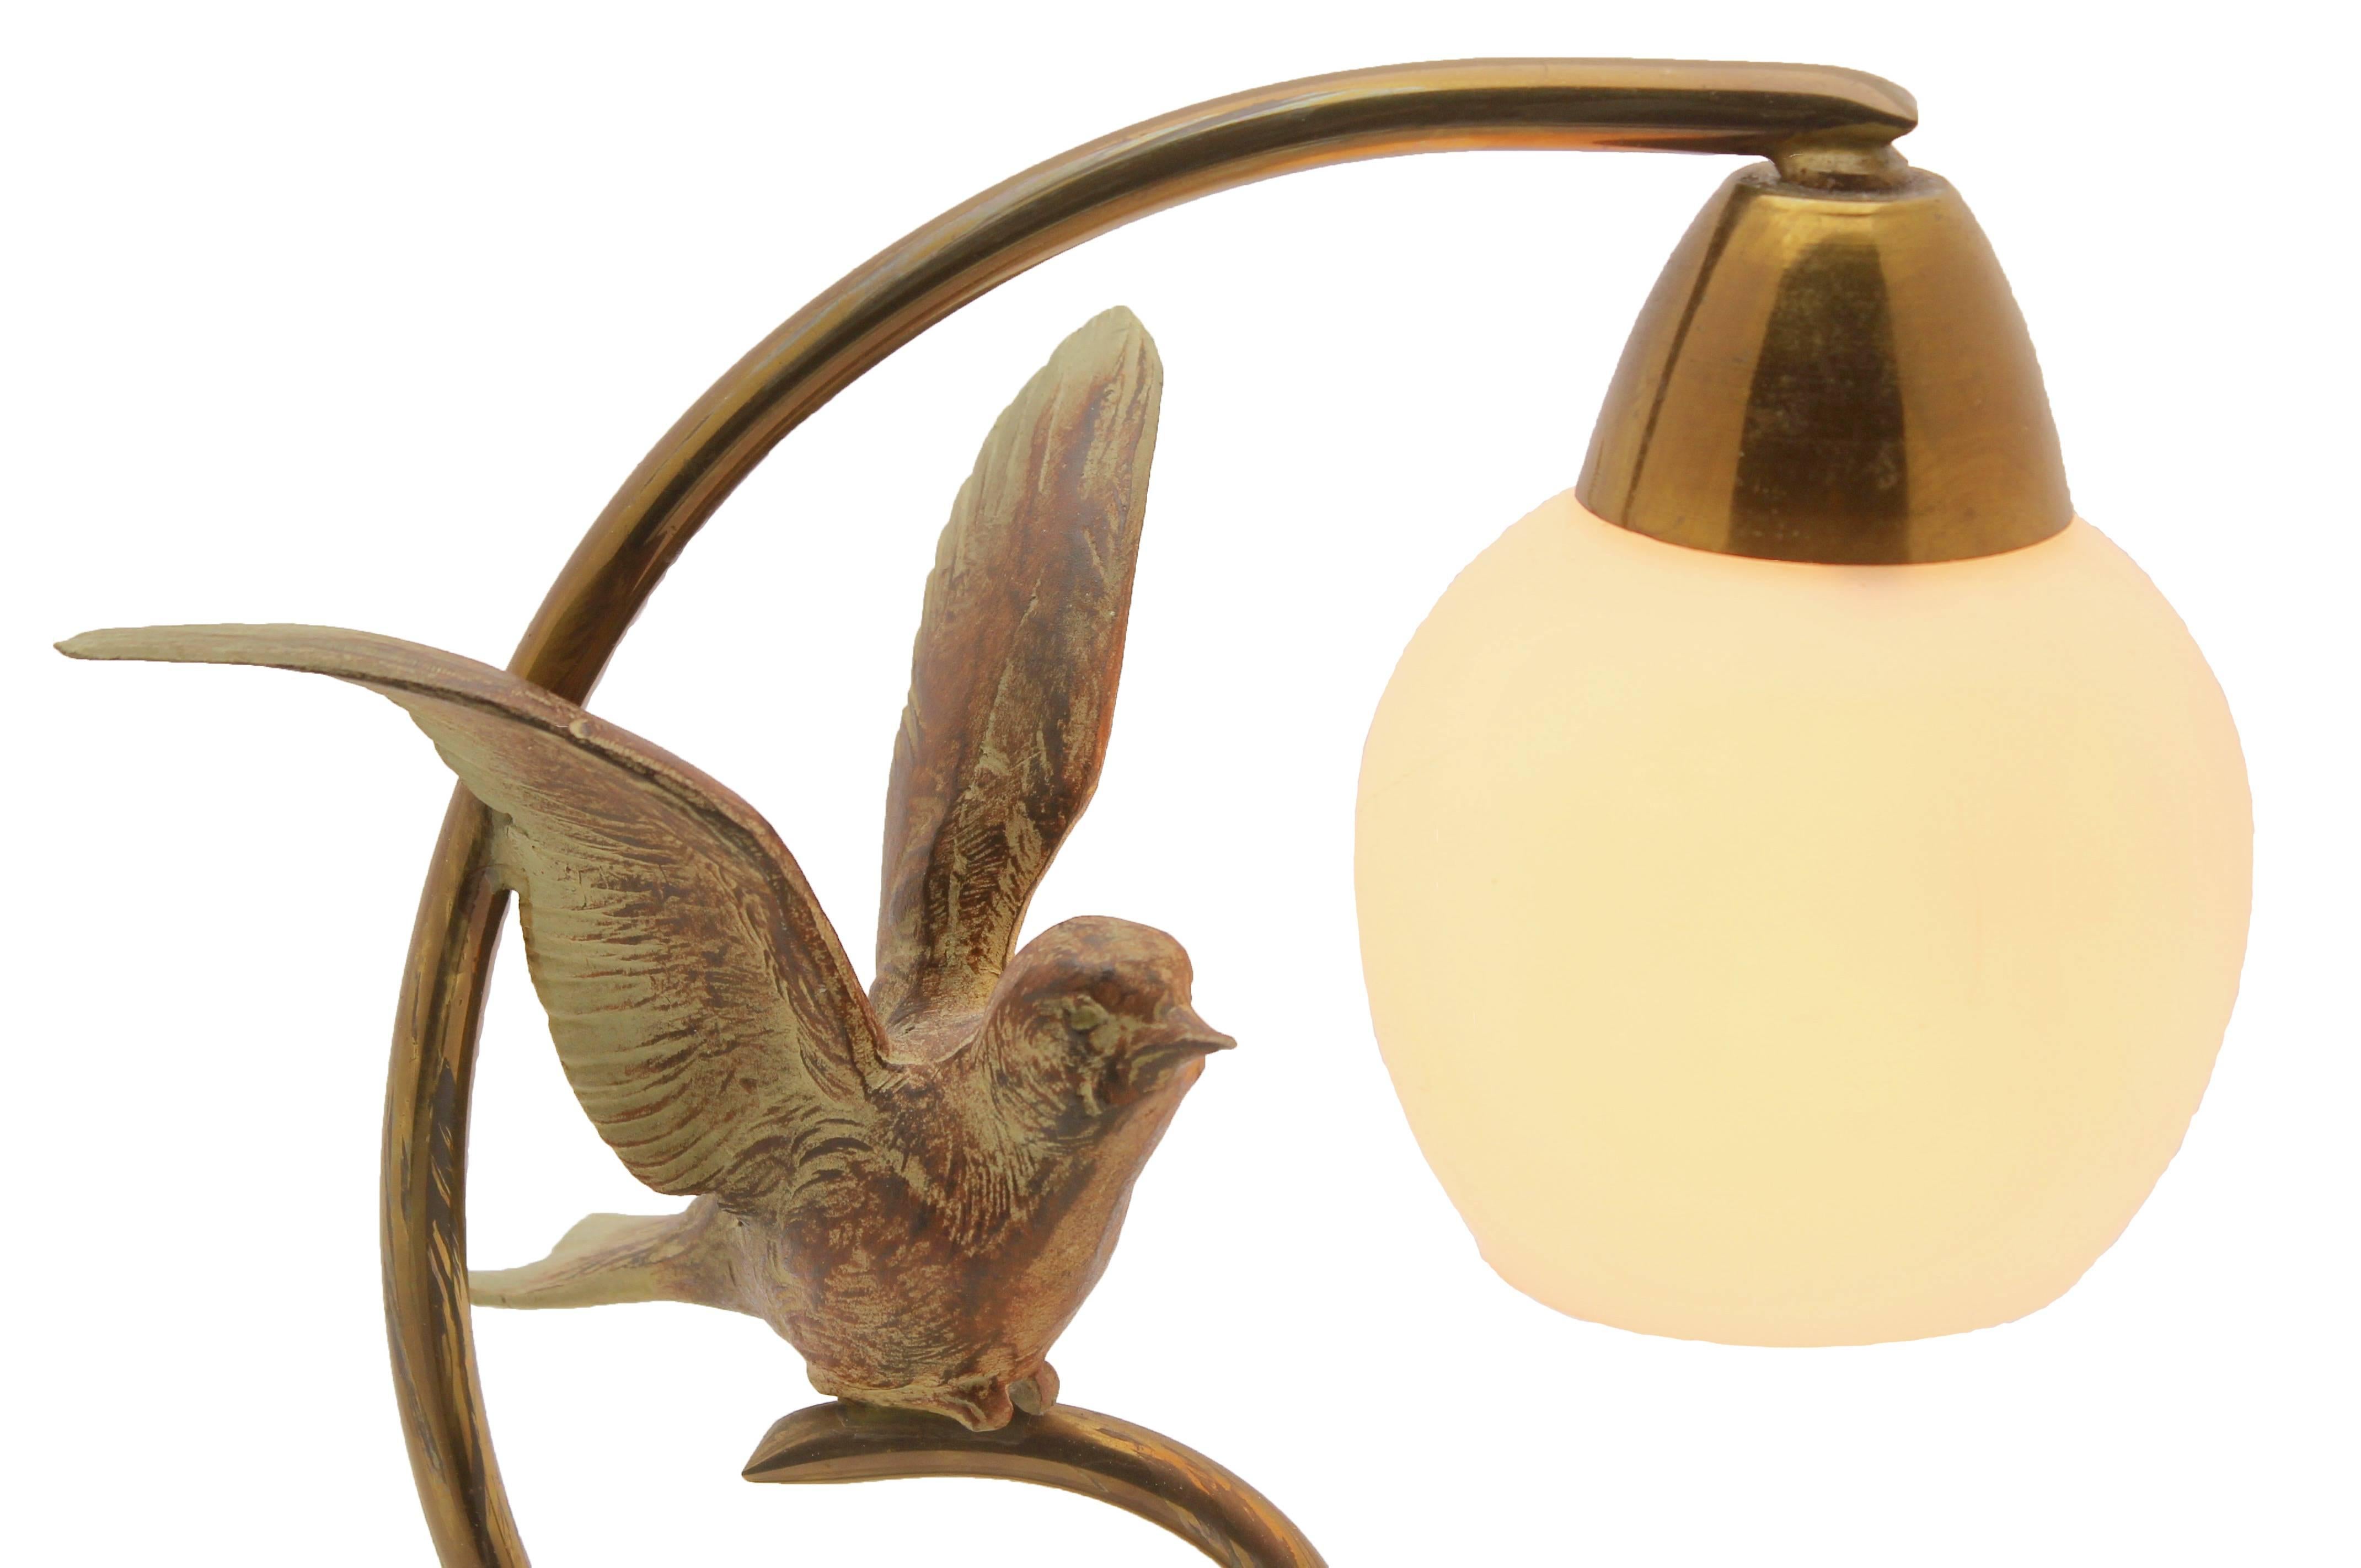 Art Deco table lamp with bird made of bronze on base of Alabaster. Label Prolux

The base retains a Factory label. Prolux France Gilly.
And in full working order. 

The piece is in excellent condition and a real beauty!
Please look at our